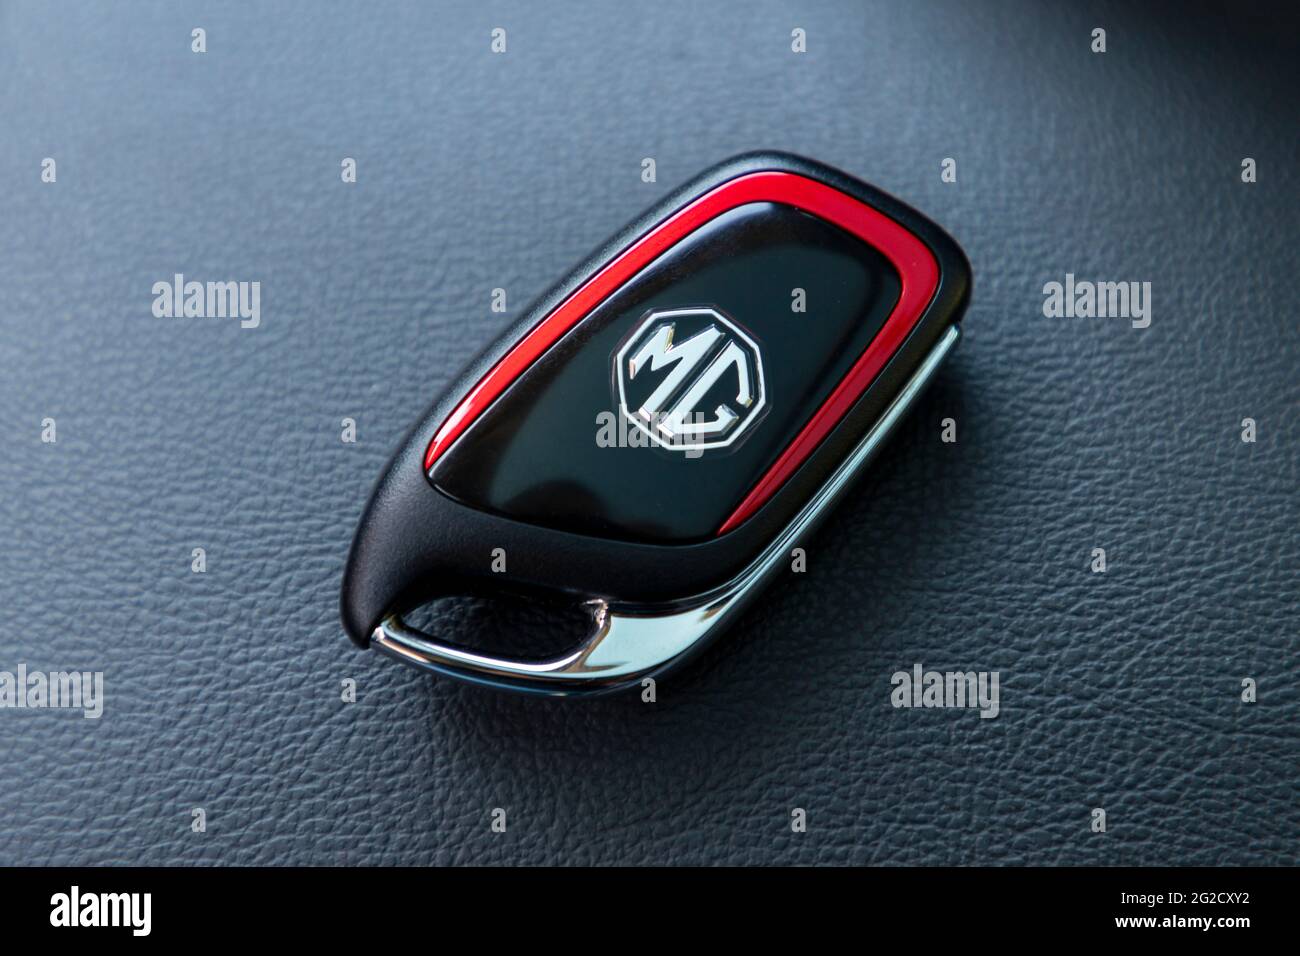 https://c8.alamy.com/comp/2G2CXY2/mg-zs-is-a-subcompact-crossover-suv-produced-by-saic-motor-under-the-mg-marque-an-all-electric-version-made-its-debut-as-zs-ev-it-has-wireless-car-k-2G2CXY2.jpg